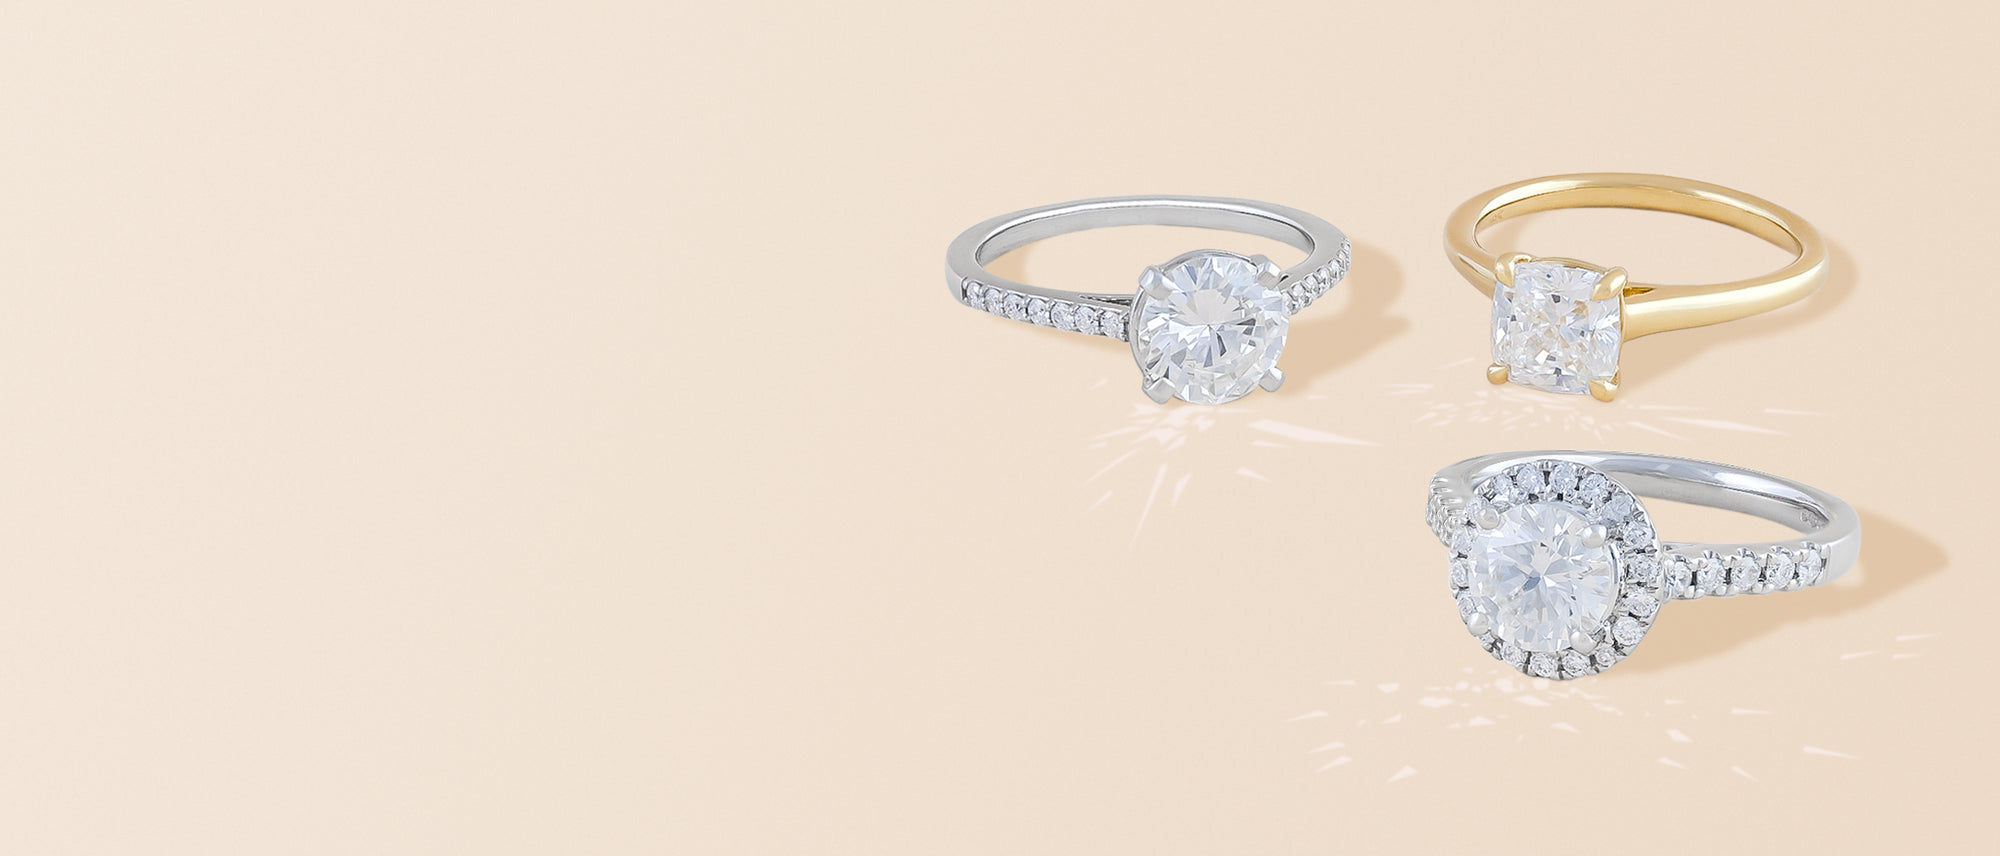 What is the average price of an engagement ring in the UK?